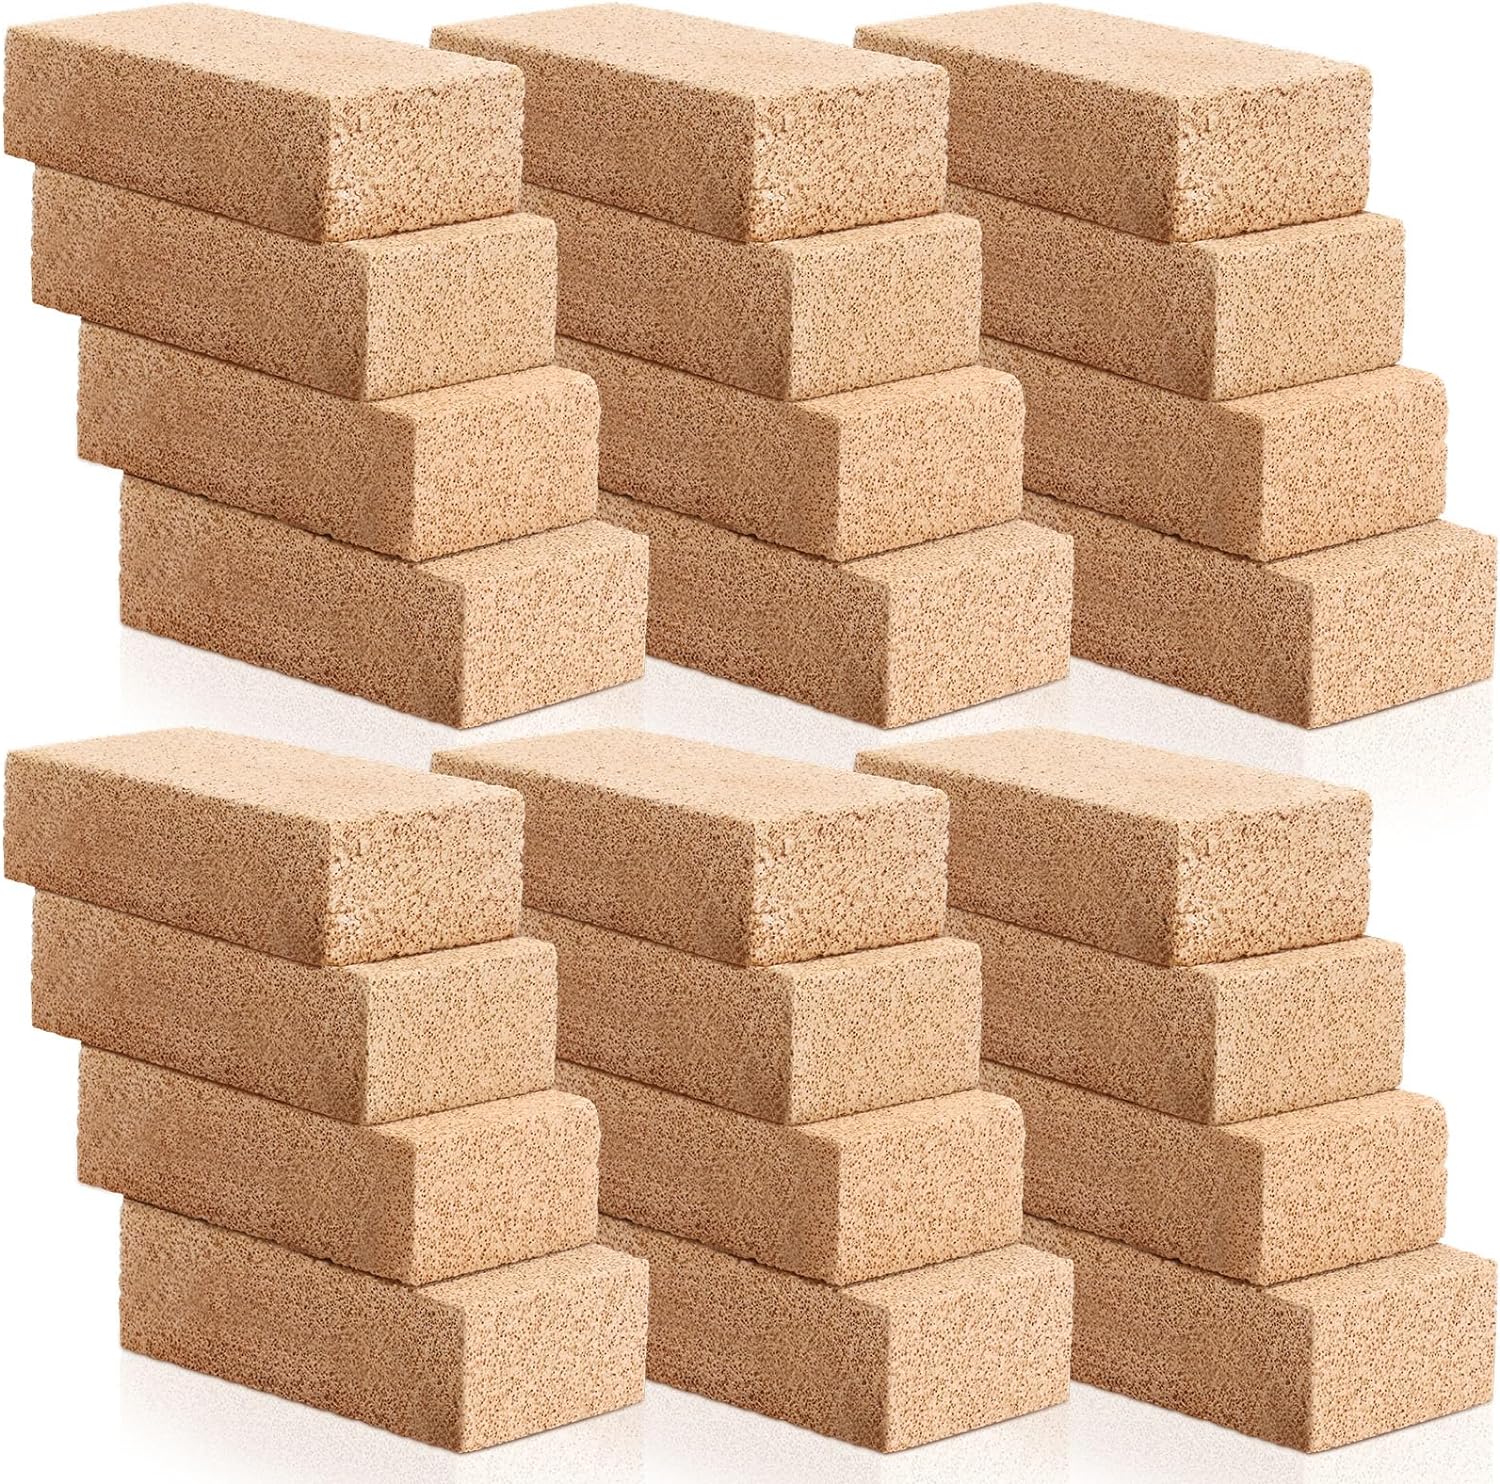 Simond Store Insulating Fire Brick 2500F 0.75inch x 4.5inch x 9inch IFB Box  of 12 Fire Bricks for Fireplaces, Pizza Ovens, Kilns, Forges 